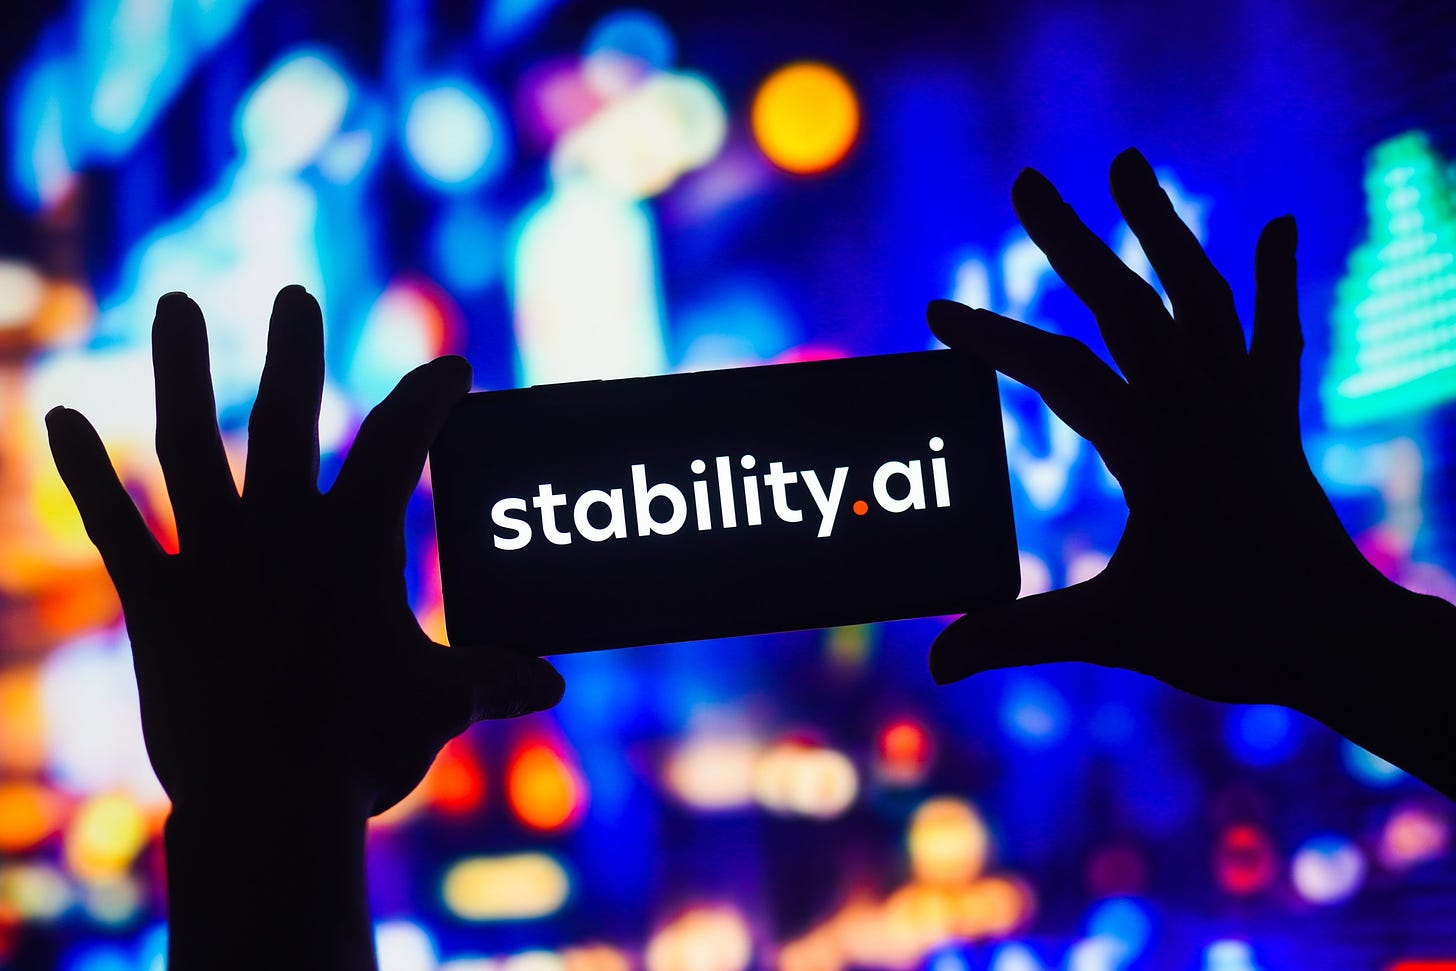 Stability AI looks to raise funds at $4B valuation | Fortune